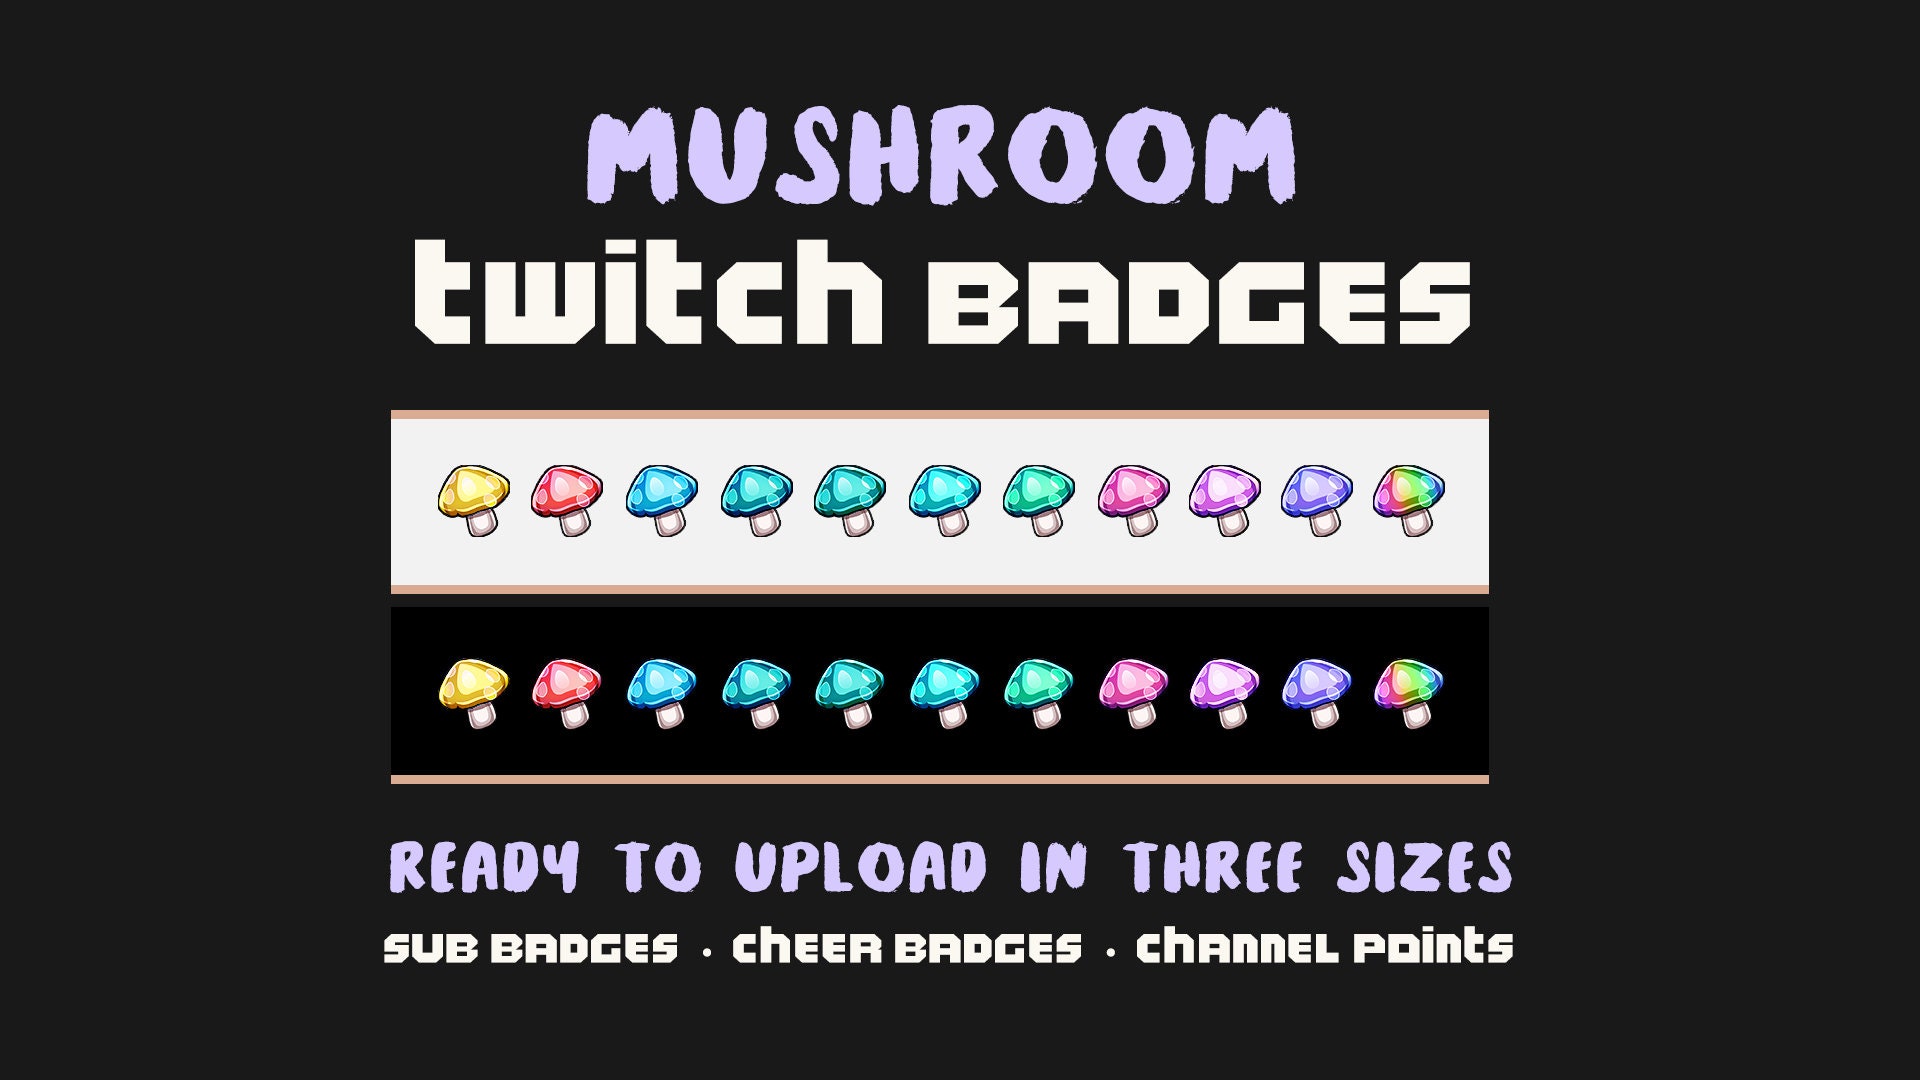 Top 21 Twitch Sub Badges To Spice Up Your Streams